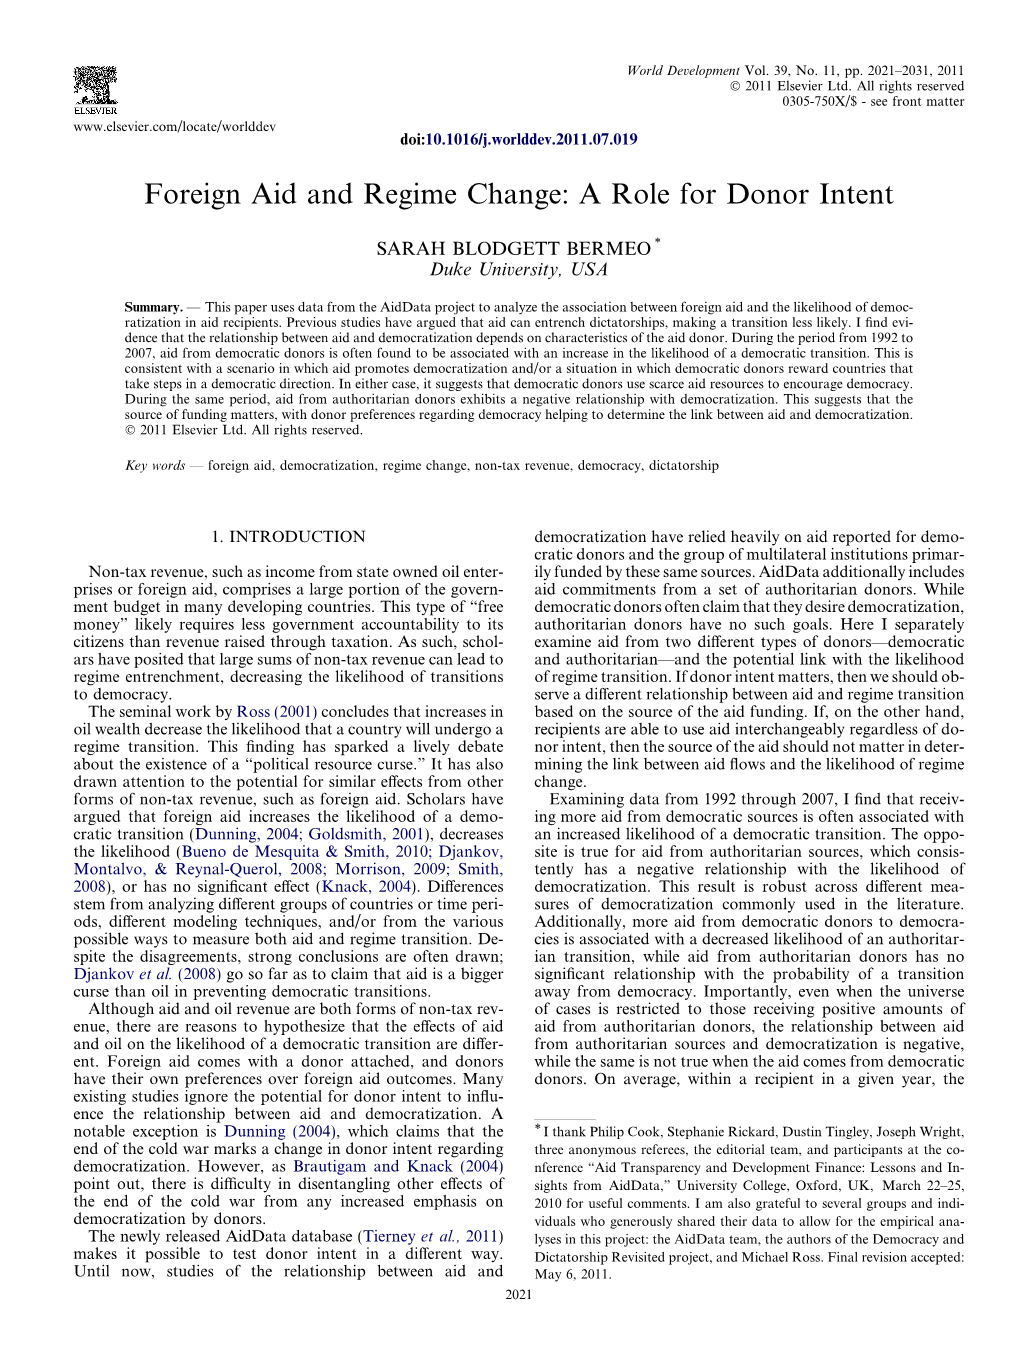 Foreign Aid and Regime Change: a Role for Donor Intent